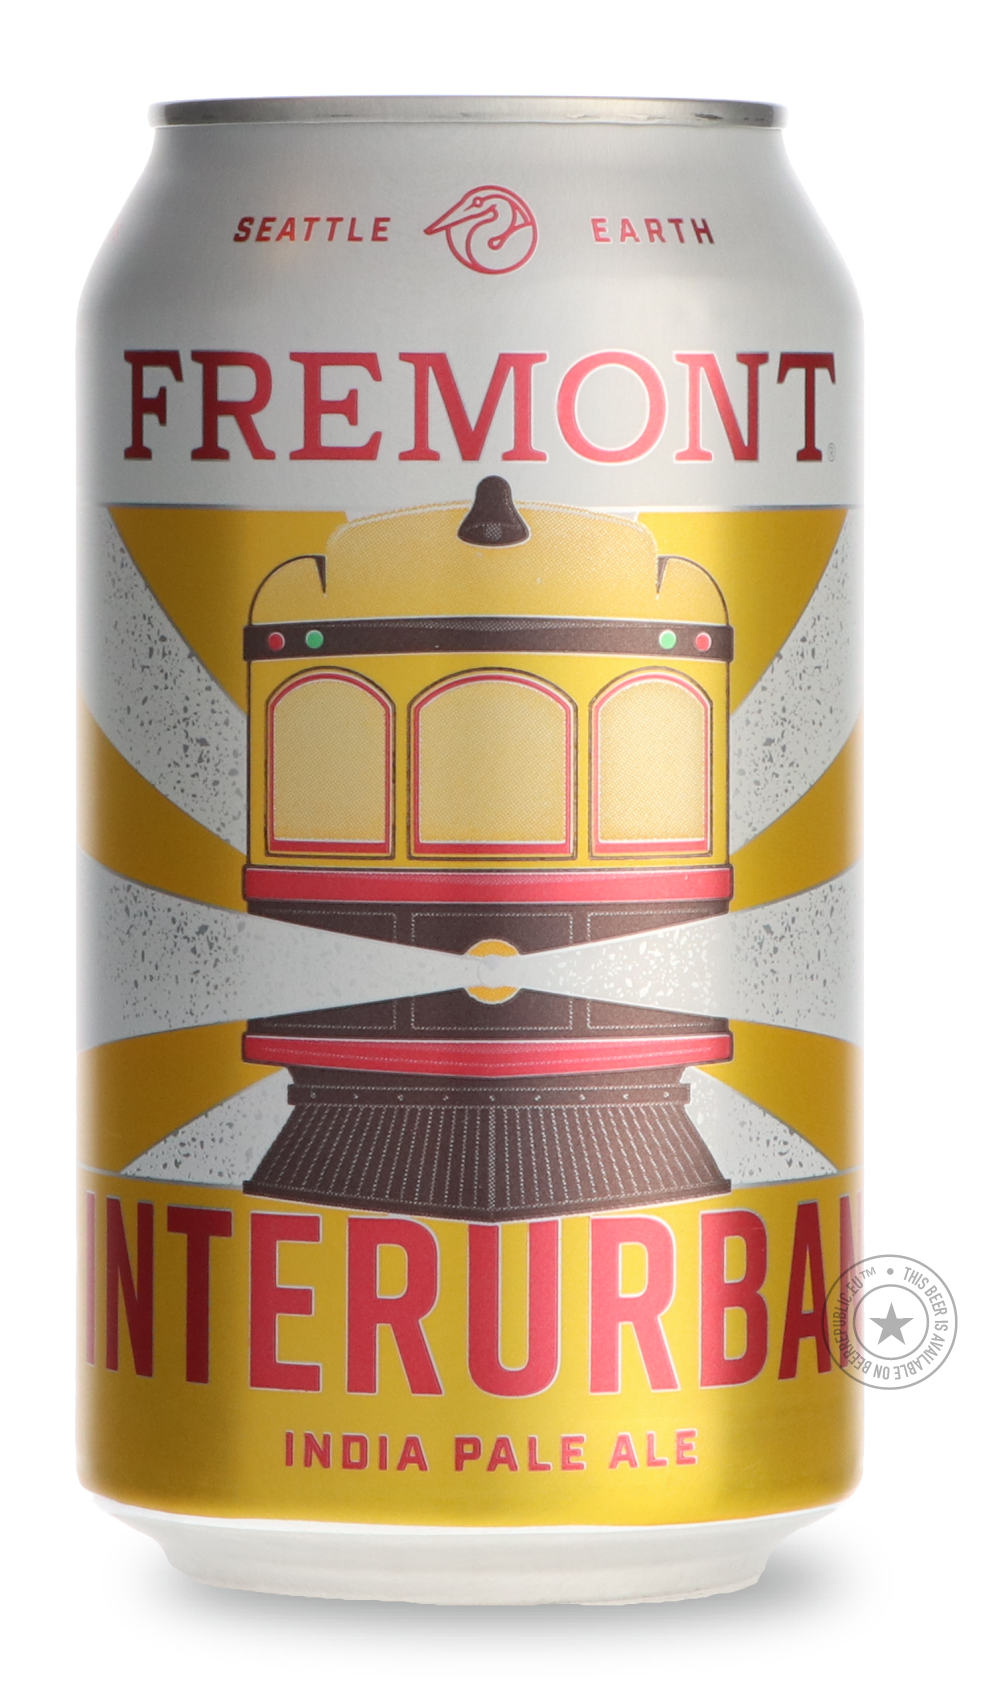 -Fremont- Interurban-IPA- Only @ Beer Republic - The best online beer store for American & Canadian craft beer - Buy beer online from the USA and Canada - Bier online kopen - Amerikaans bier kopen - Craft beer store - Craft beer kopen - Amerikanisch bier kaufen - Bier online kaufen - Acheter biere online - IPA - Stout - Porter - New England IPA - Hazy IPA - Imperial Stout - Barrel Aged - Barrel Aged Imperial Stout - Brown - Dark beer - Blond - Blonde - Pilsner - Lager - Wheat - Weizen - Amber - Barley Wine 